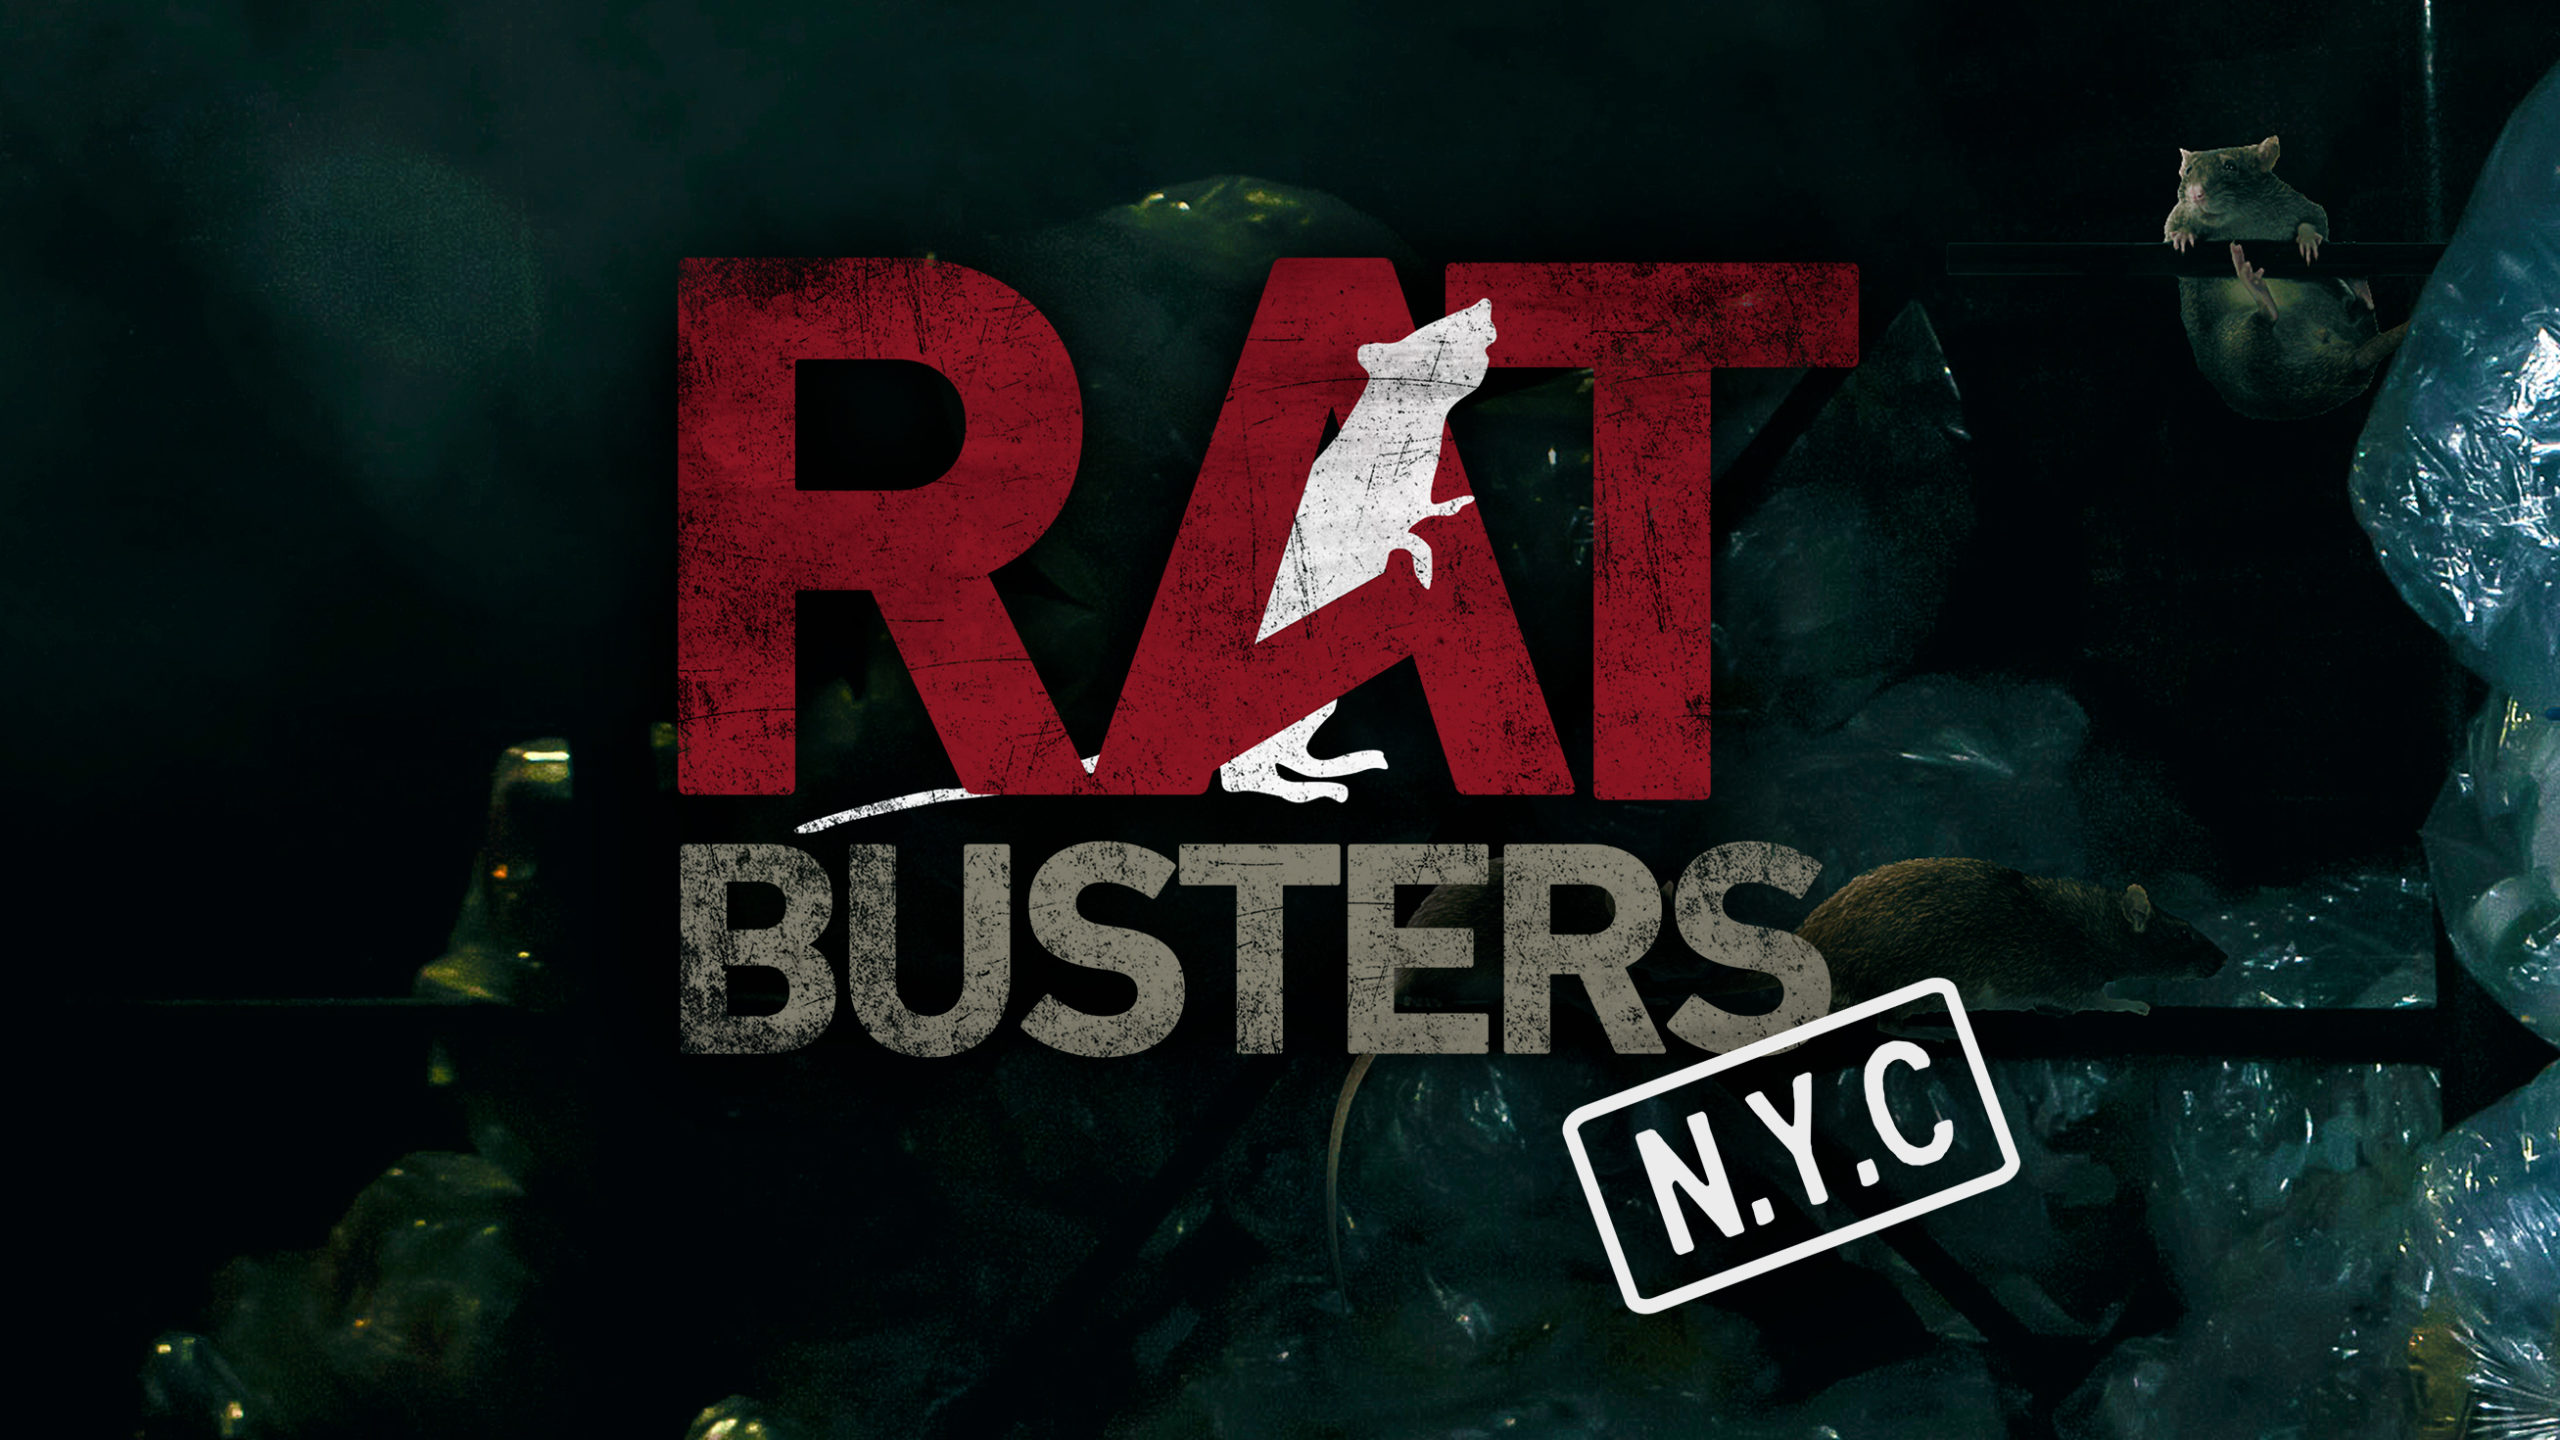 RATBUSTERS